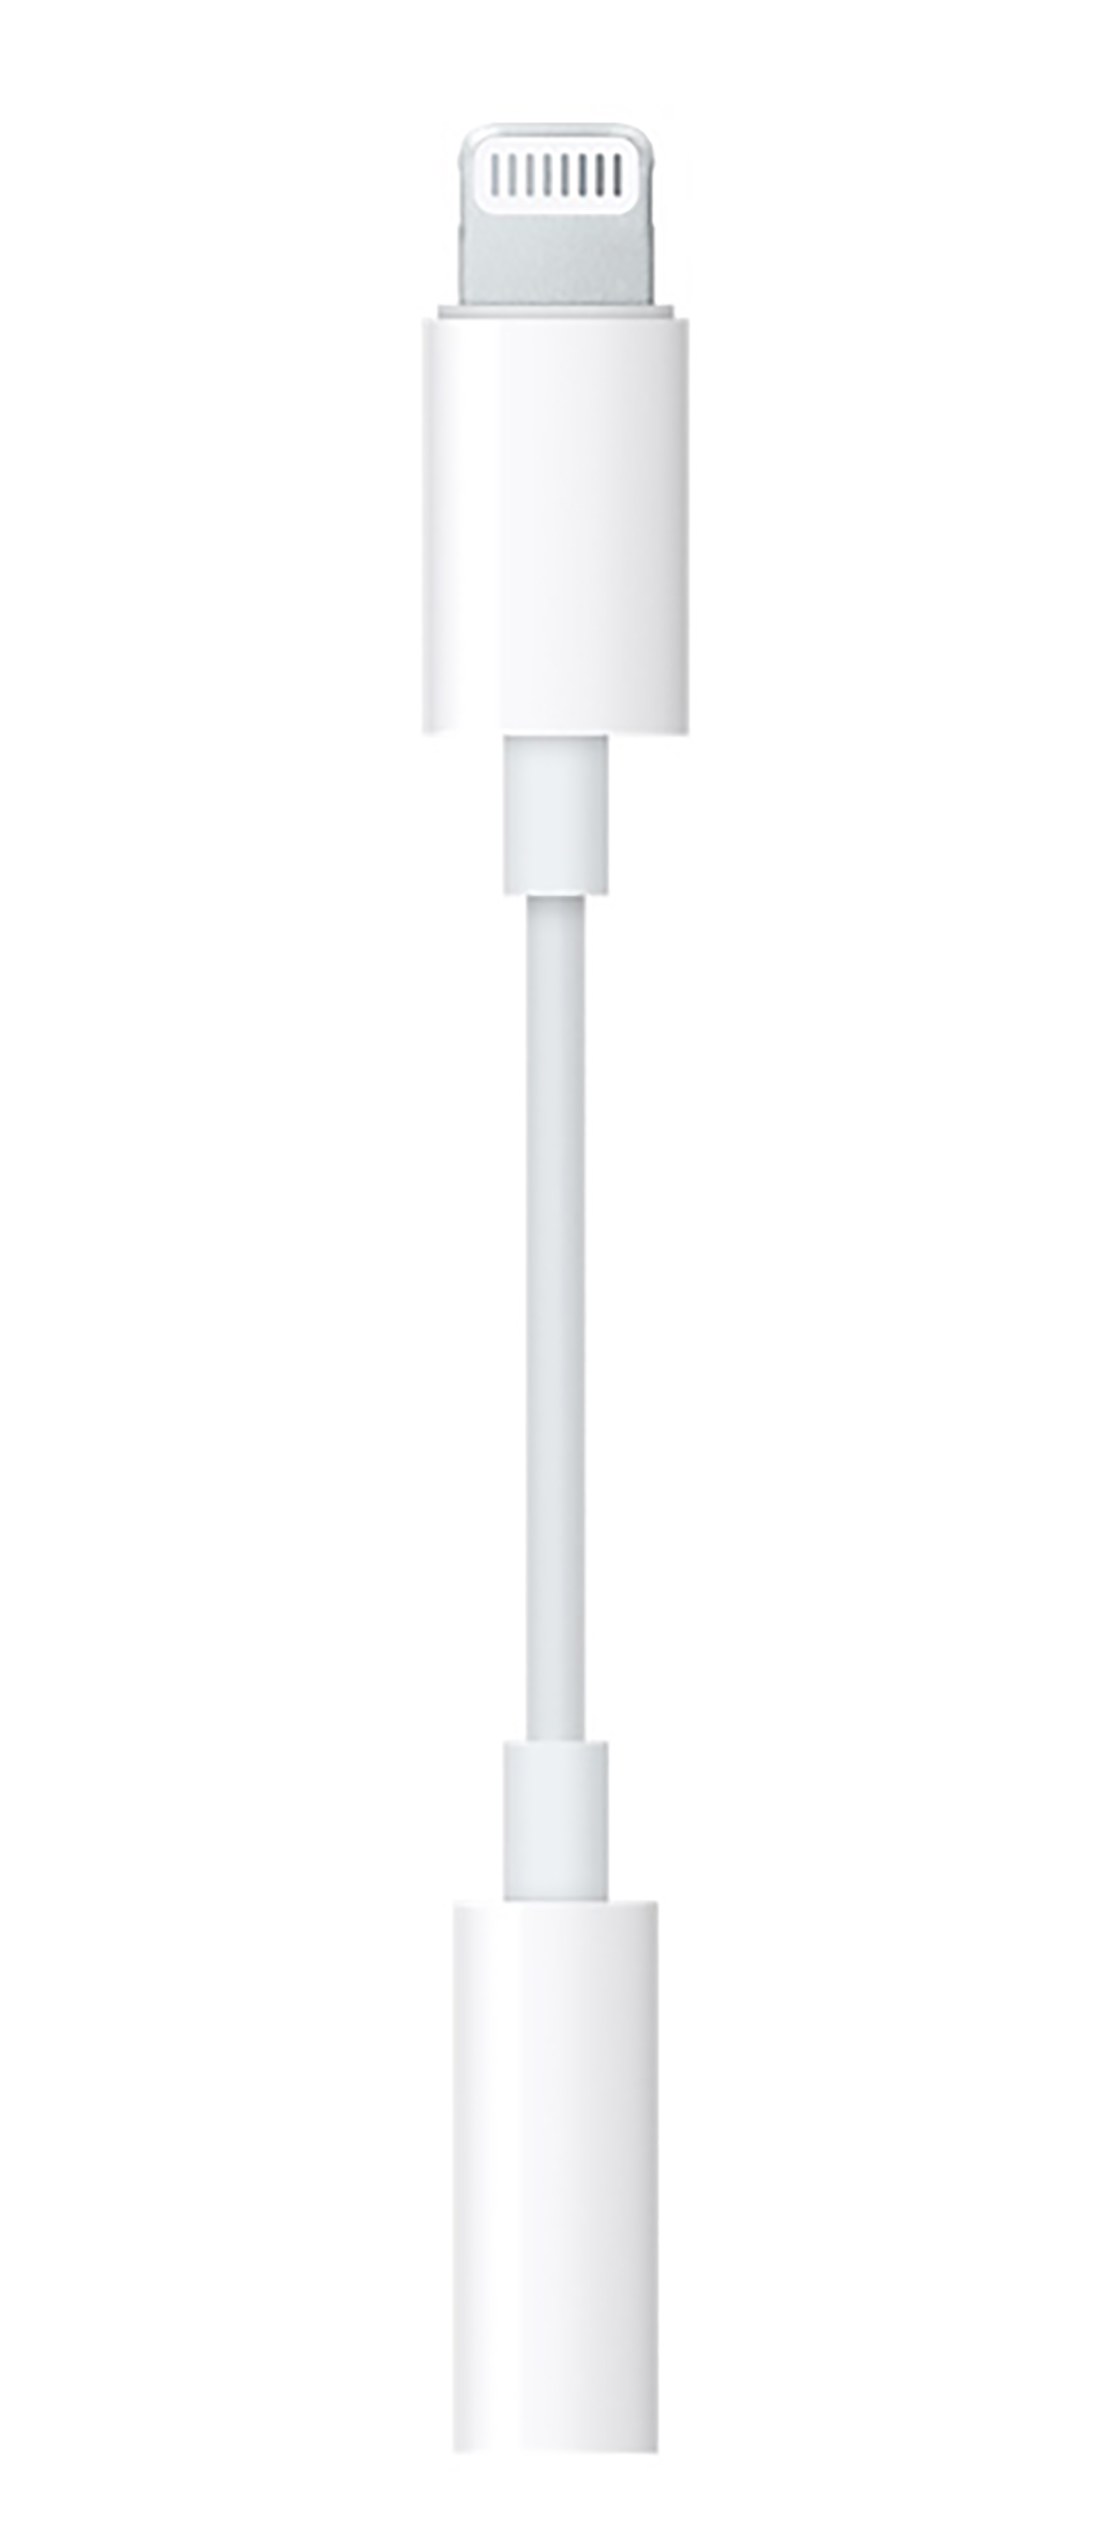 Apple Lightning to 3.5 mm Headphone Jack Adapter - White (MMX62AM/A) - image 1 of 3